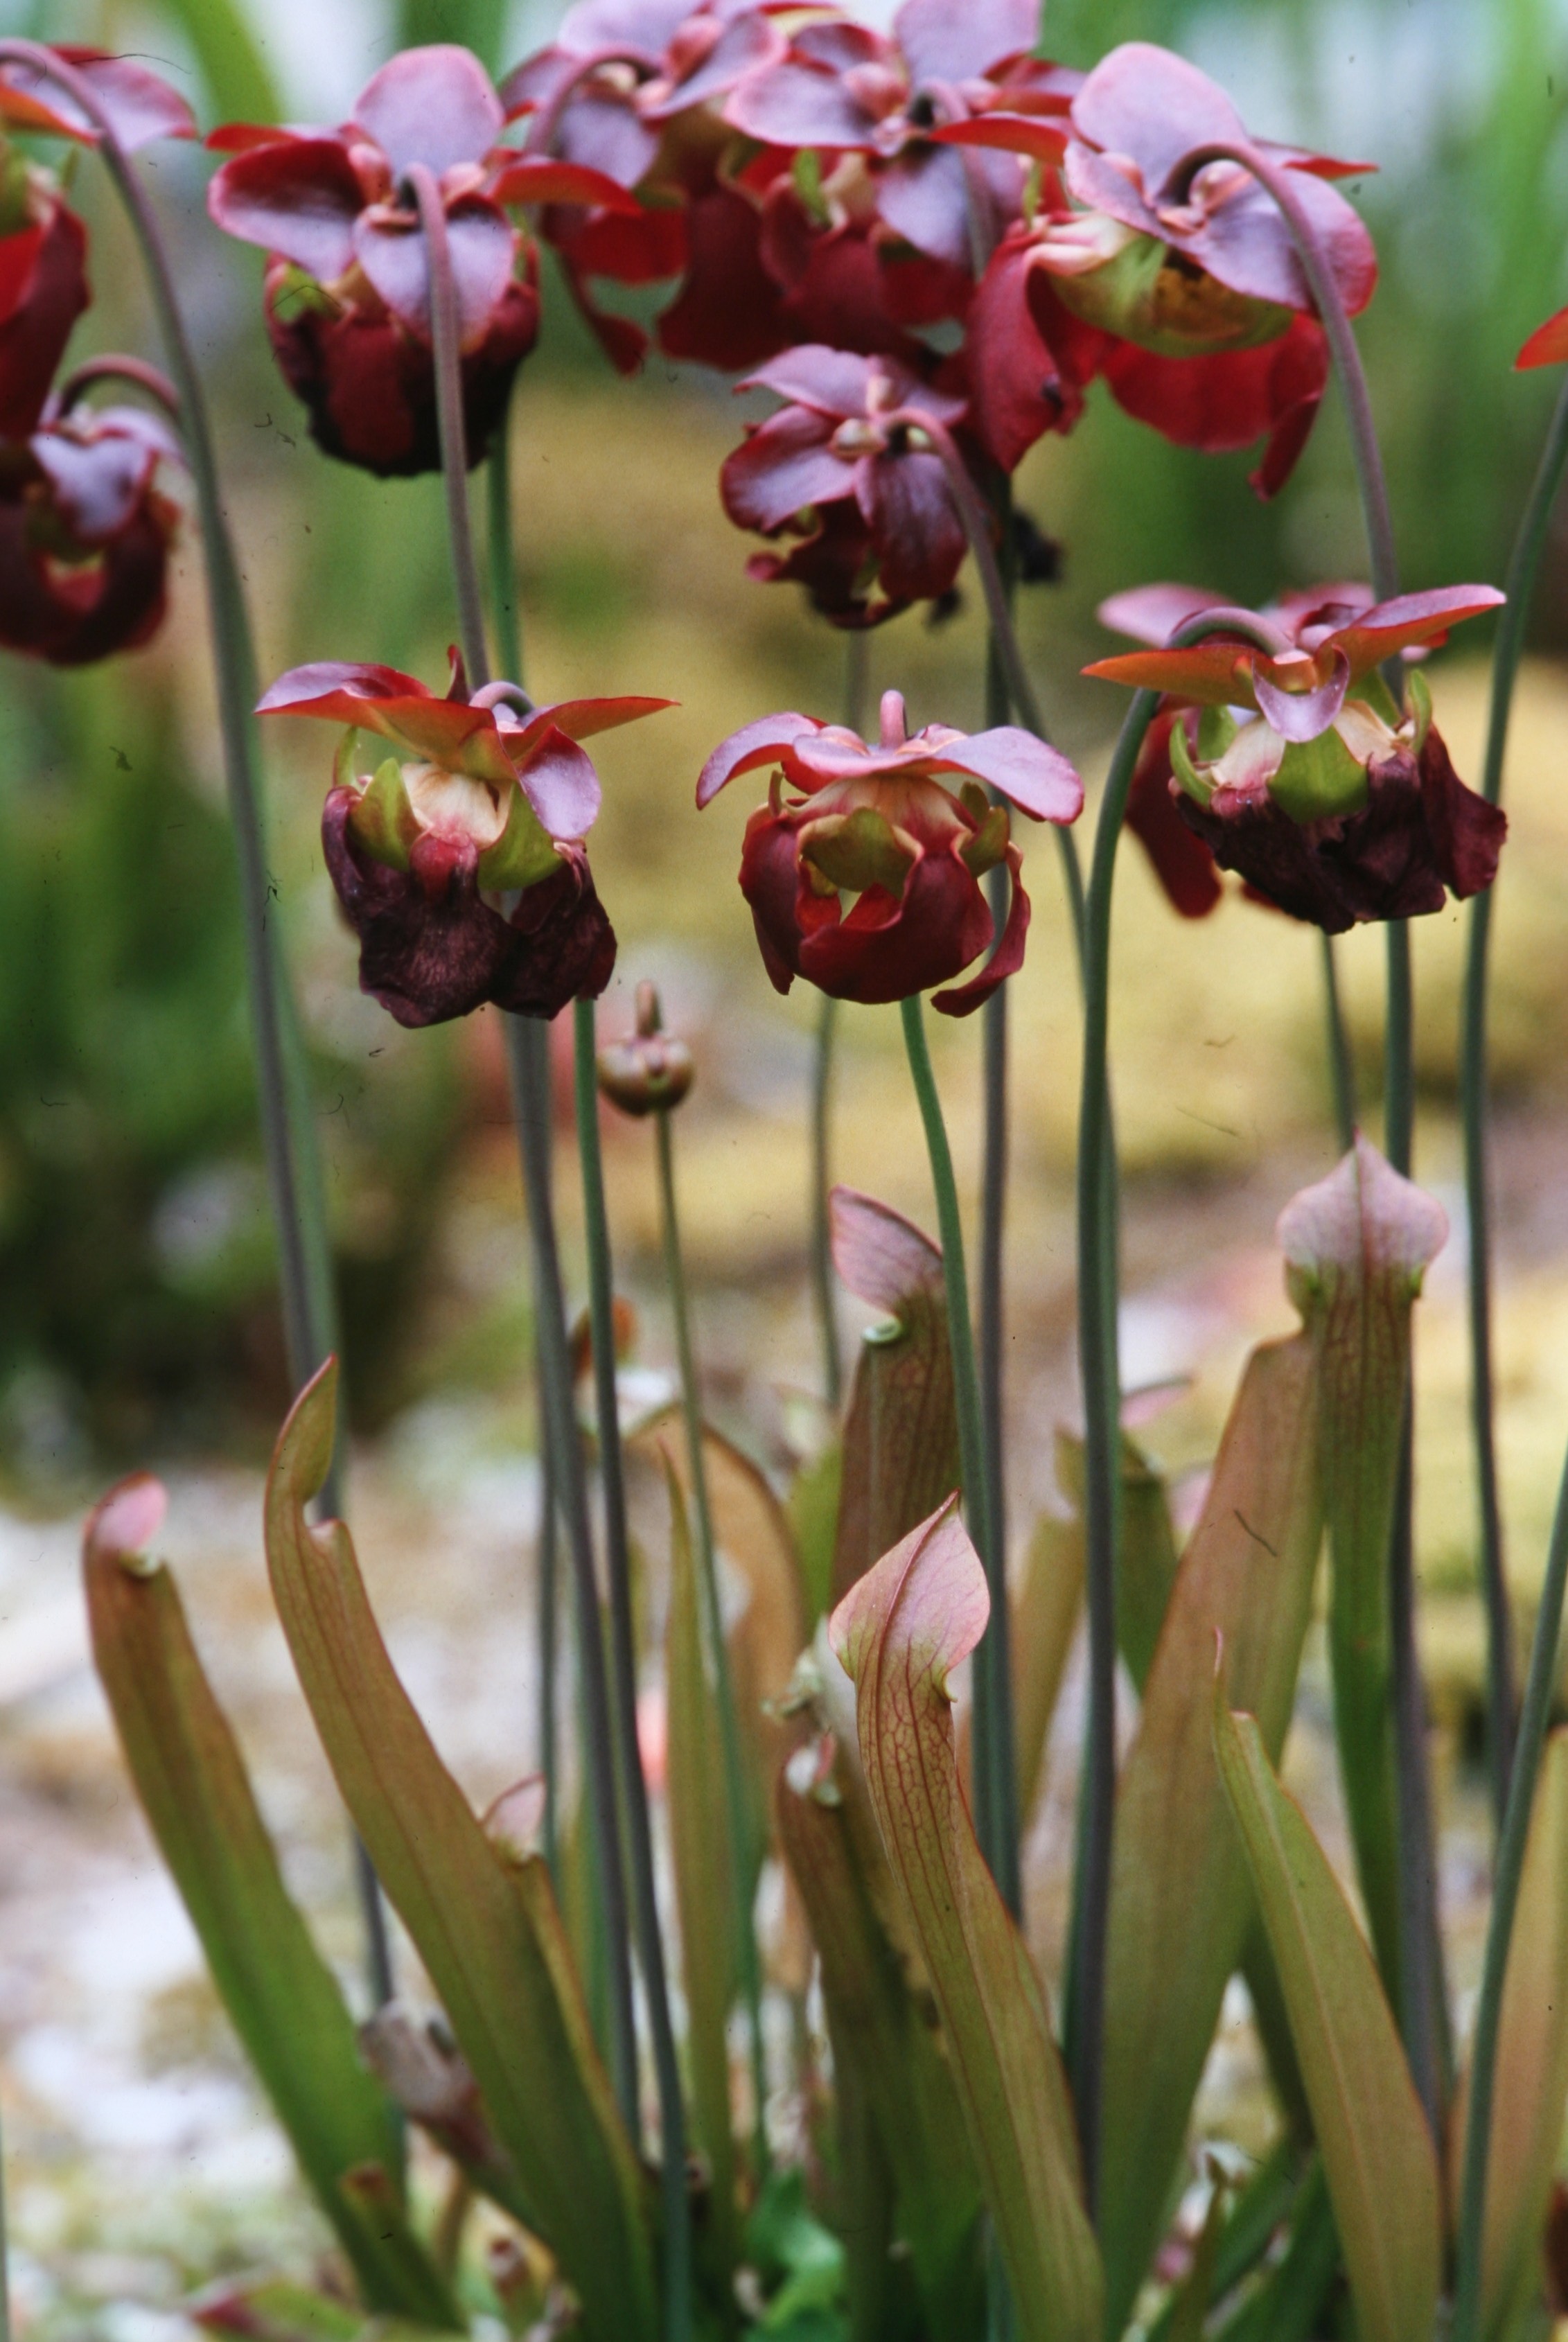 The Scientific Name is Sarracenia rubra ssp. rubra. You will likely hear them called Sweet Pitcherplant, Red Pitcherplant, Sweet Pitcher-plant. This picture shows the Small, deep maroon-purple flowers. of Sarracenia rubra ssp. rubra